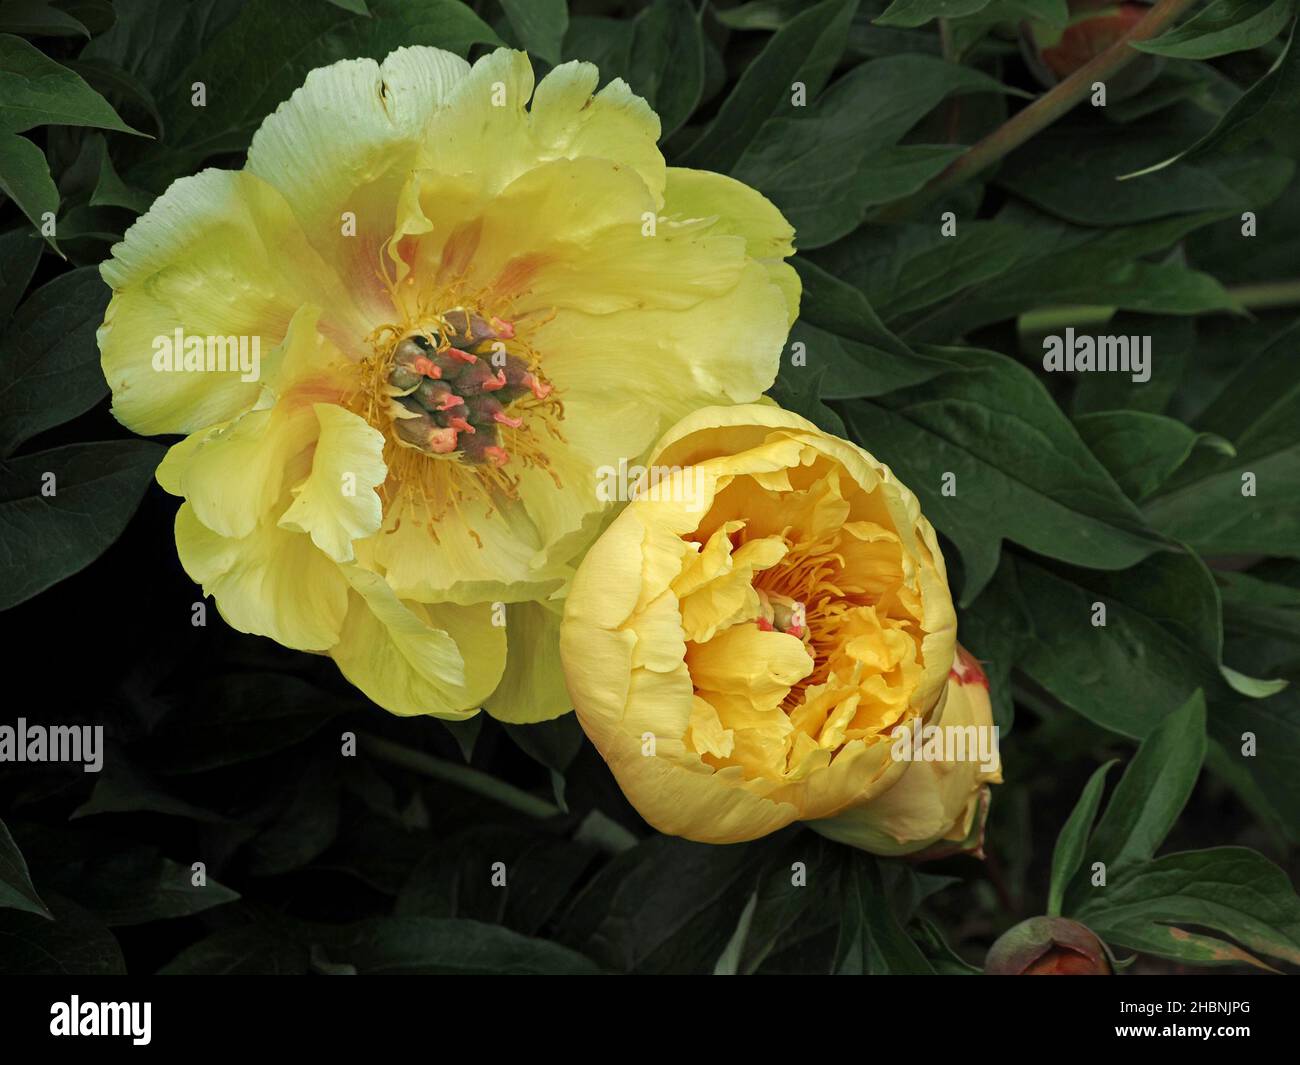 two 2 exotic yellow flowers of cultivated Peony (Paeonia sp) with elaborate stamens, delicate petals & green foliage in garden in Cumbria,England,UK Stock Photo